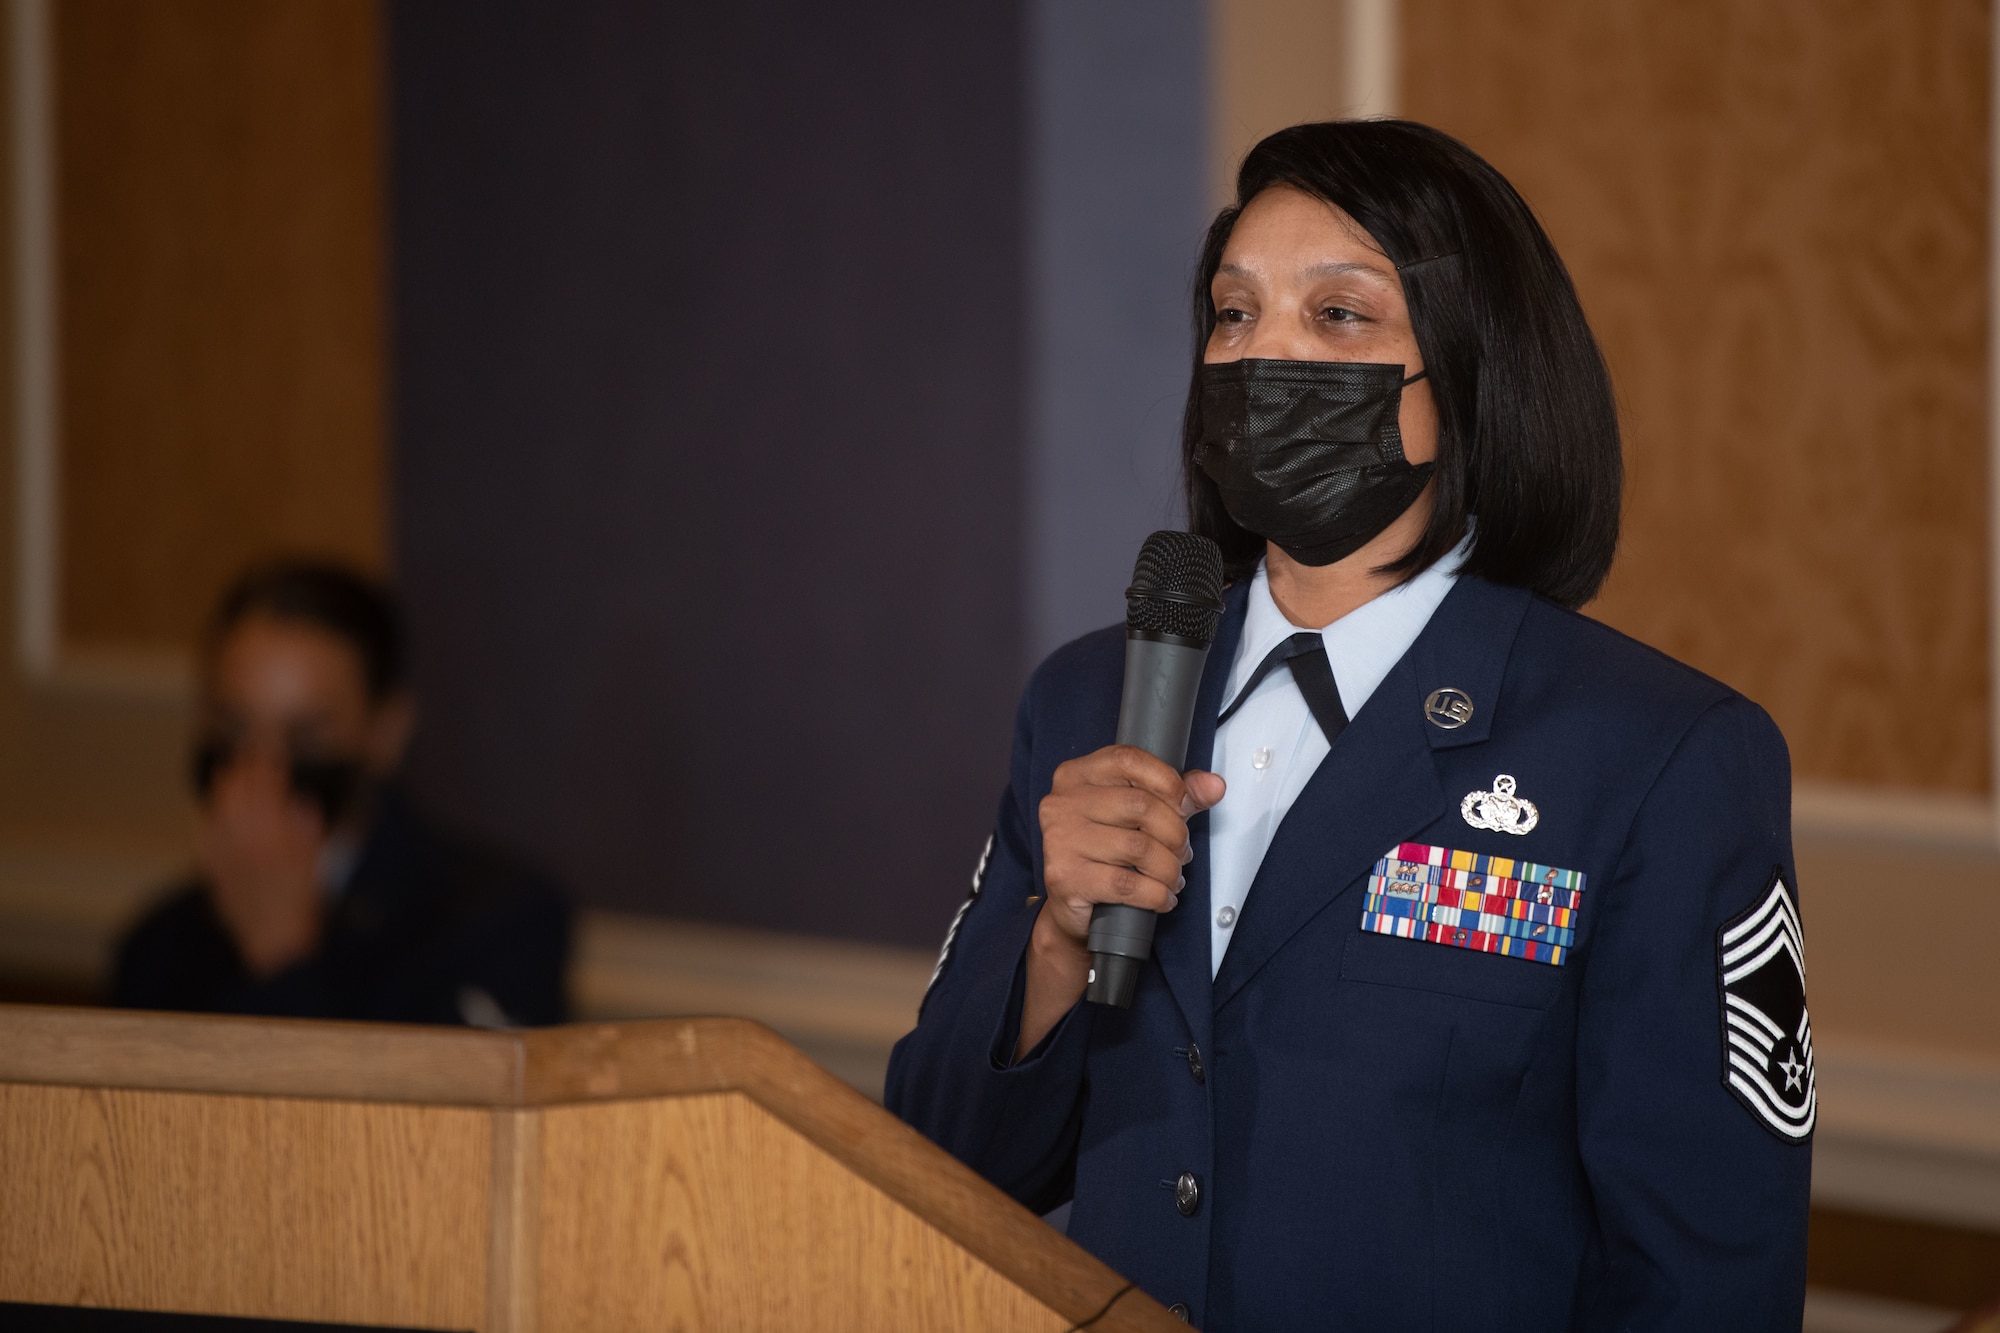 Chief Master Sgt. Lawanda Jackson, 192nd Support Squadron Mobility Flight chief, addresses the audience in attendance at her promotion ceremony on July 10, 20221, at Joint Base Langley-Eustis, Virginia. She was the first Black woman to be promoted to chief in the history of the Virginia Air National Guard. (U.S. Air National Guard photo by Tech. Sgt. Eugene Silvers)